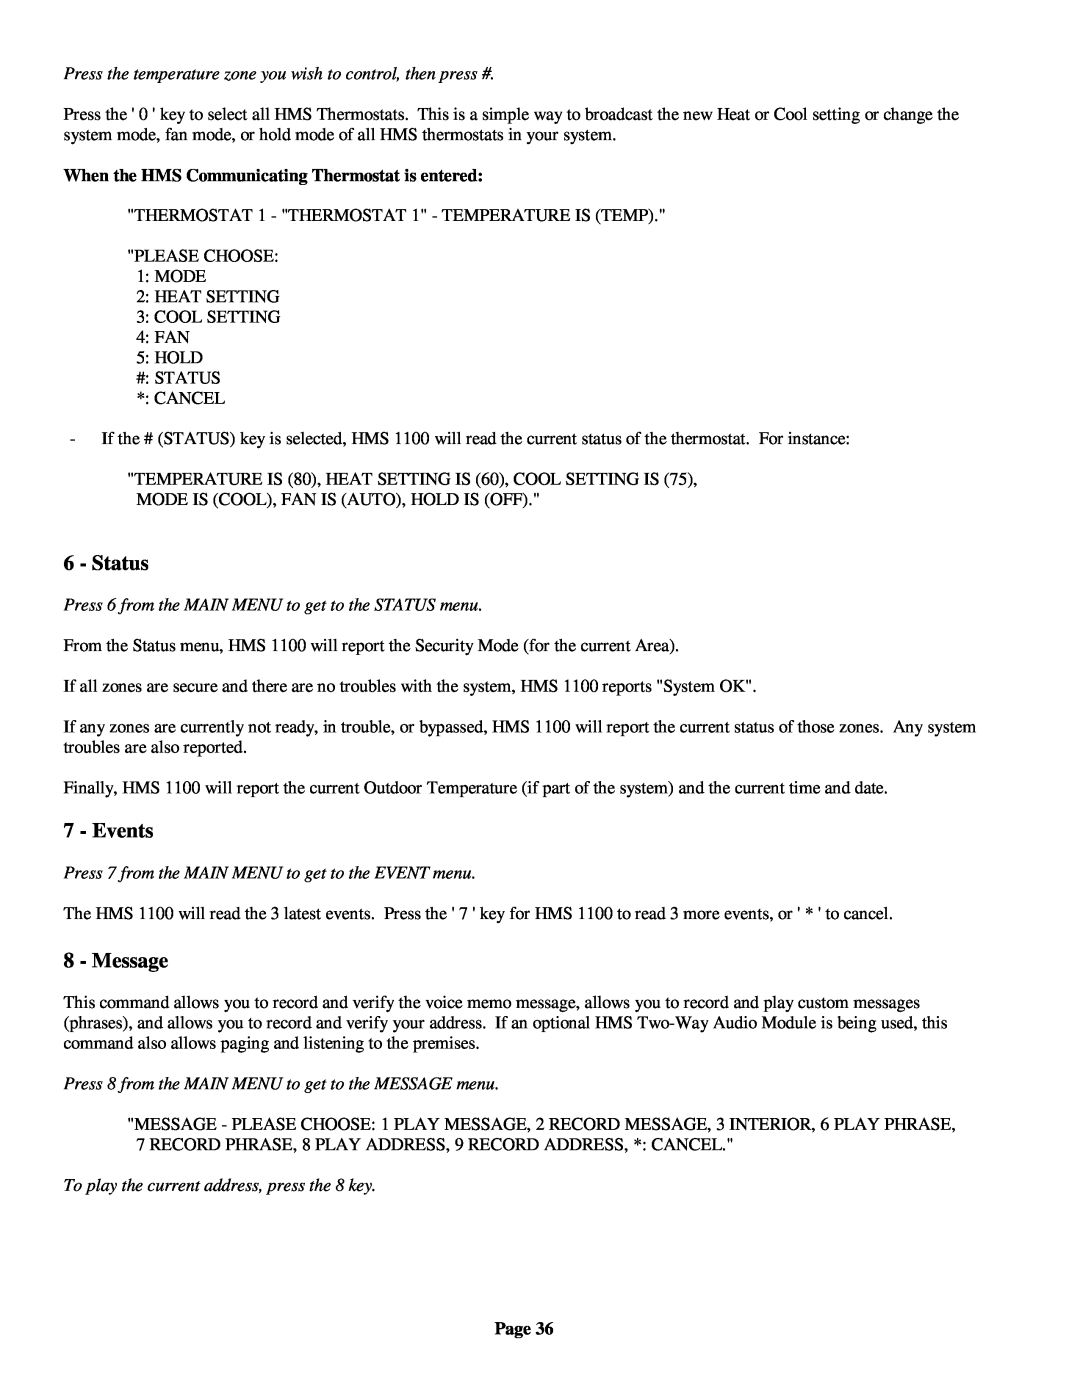 On-Q/Legrand HMS 1100 owner manual Status, Events, Message, When the HMS Communicating Thermostat is entered, Page 